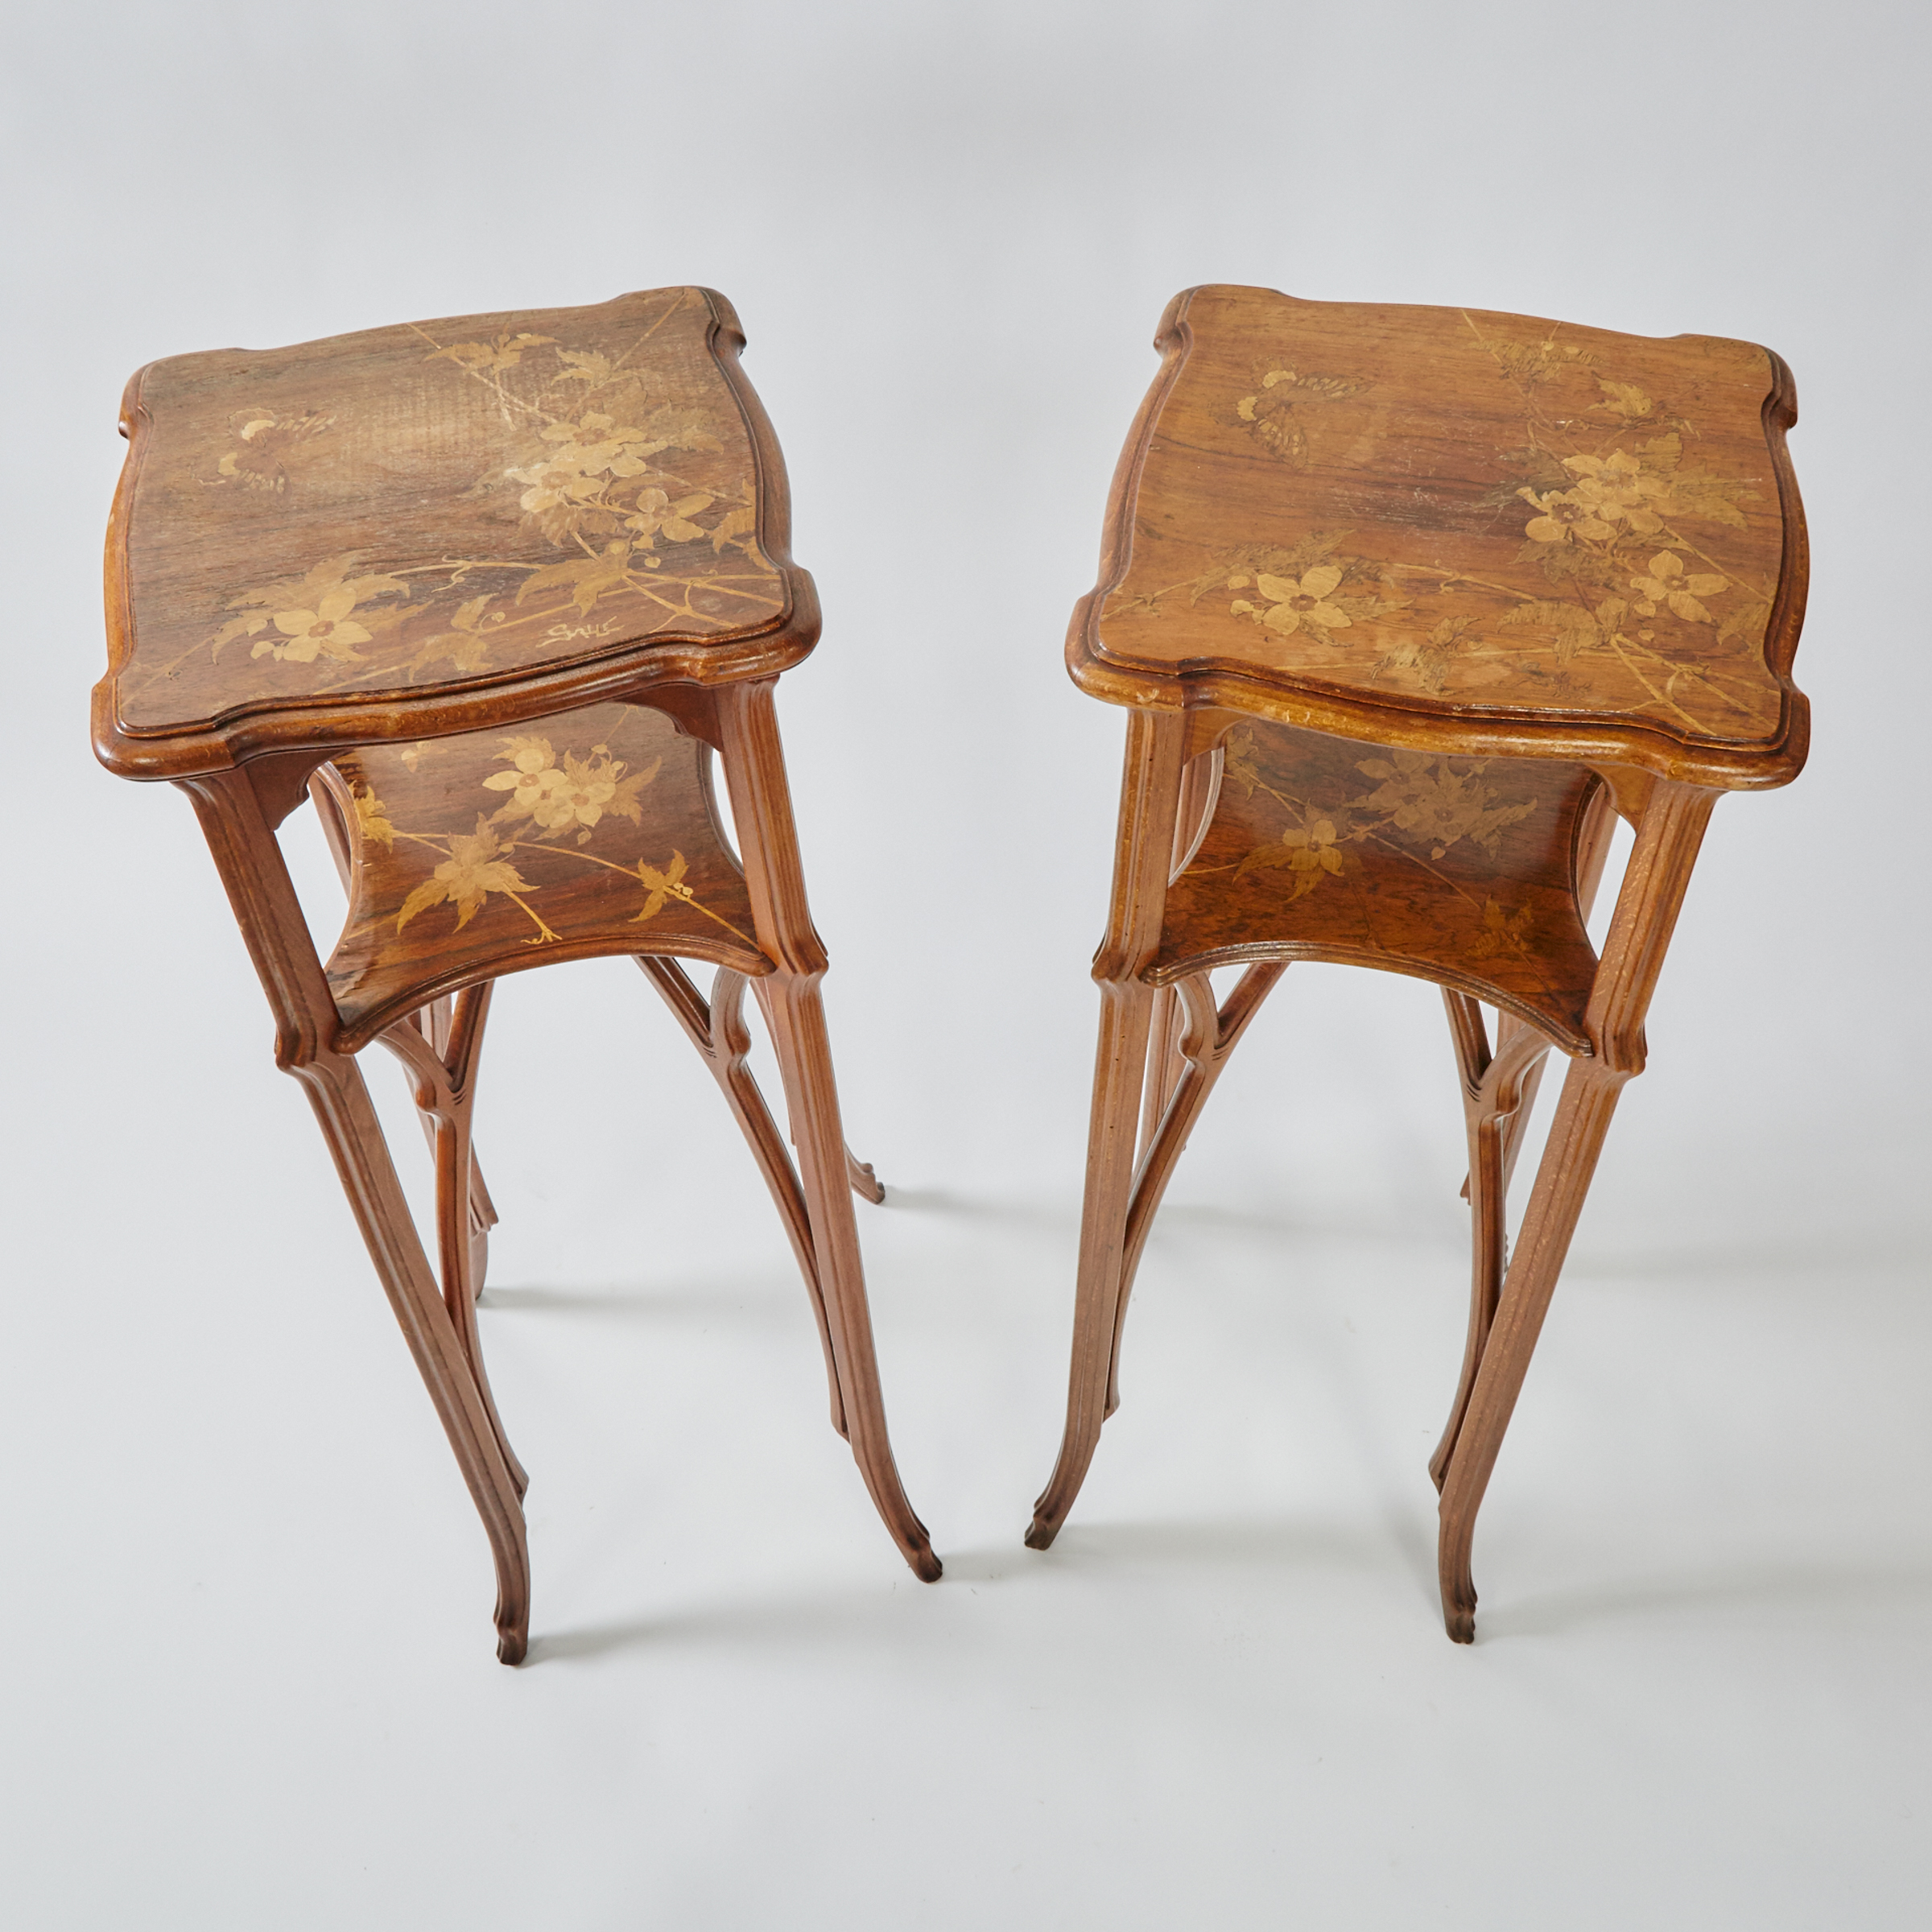 Pair of Émile Gallé French Art Nouveau Mixed Wood Marquetry Inlaid Plant Stands, 19th/early 20th Century